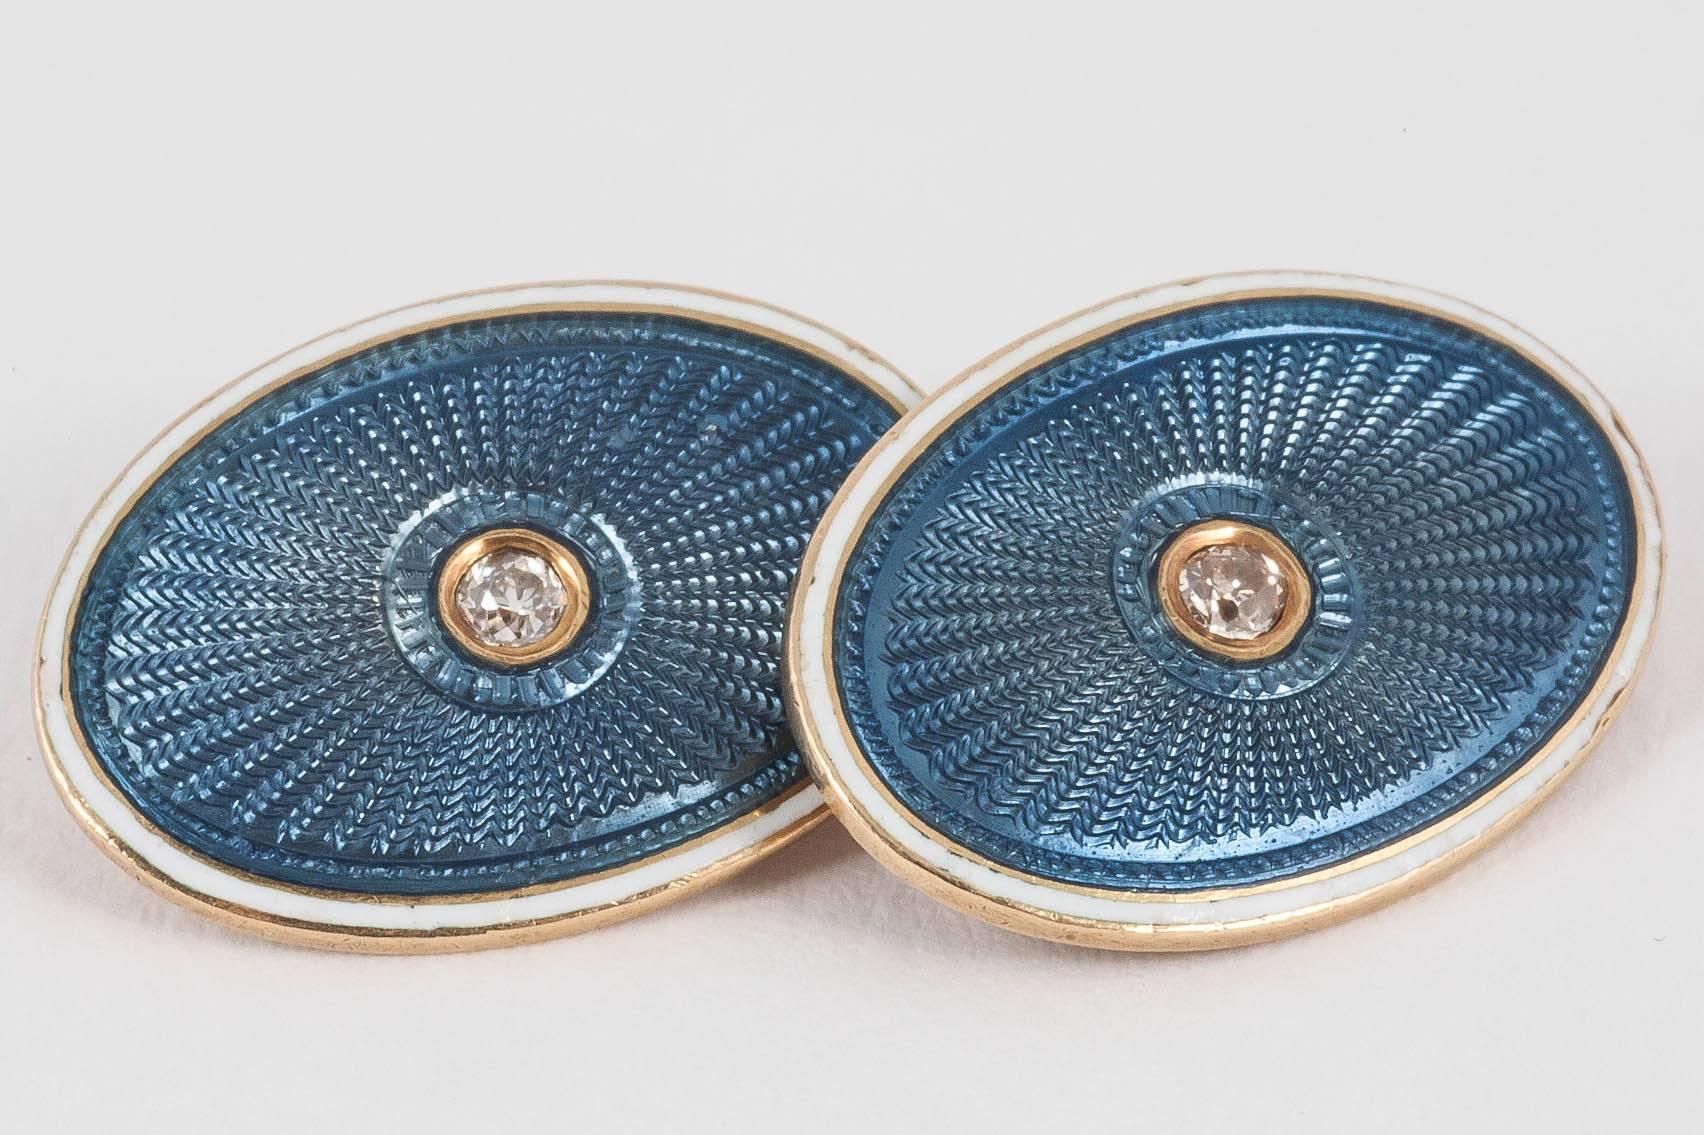 Fine pair of guilloche,blue enamel cufflinks of sunburst design with a diamond centre,and white enamel border,mounte in 18ct yellow gold,English, c 1900-10